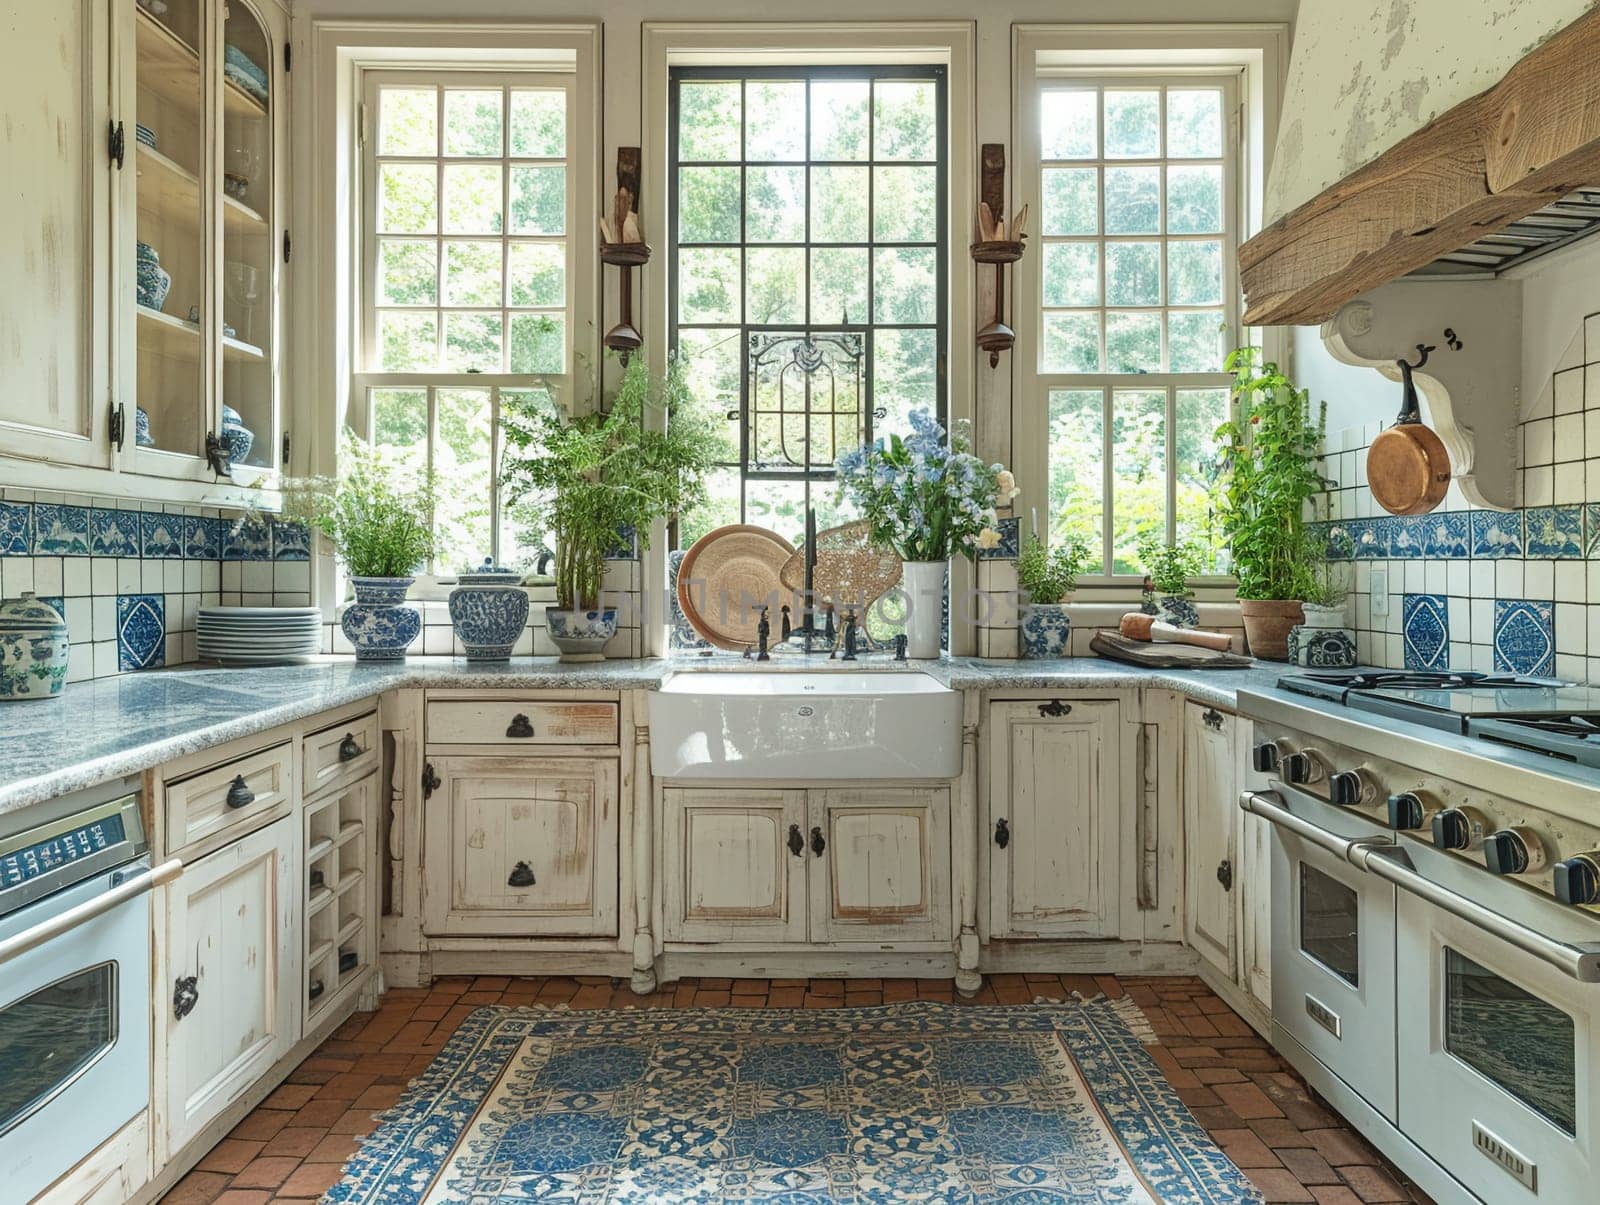 Classic French country kitchen with blue and white porcelain and farmhouse sink